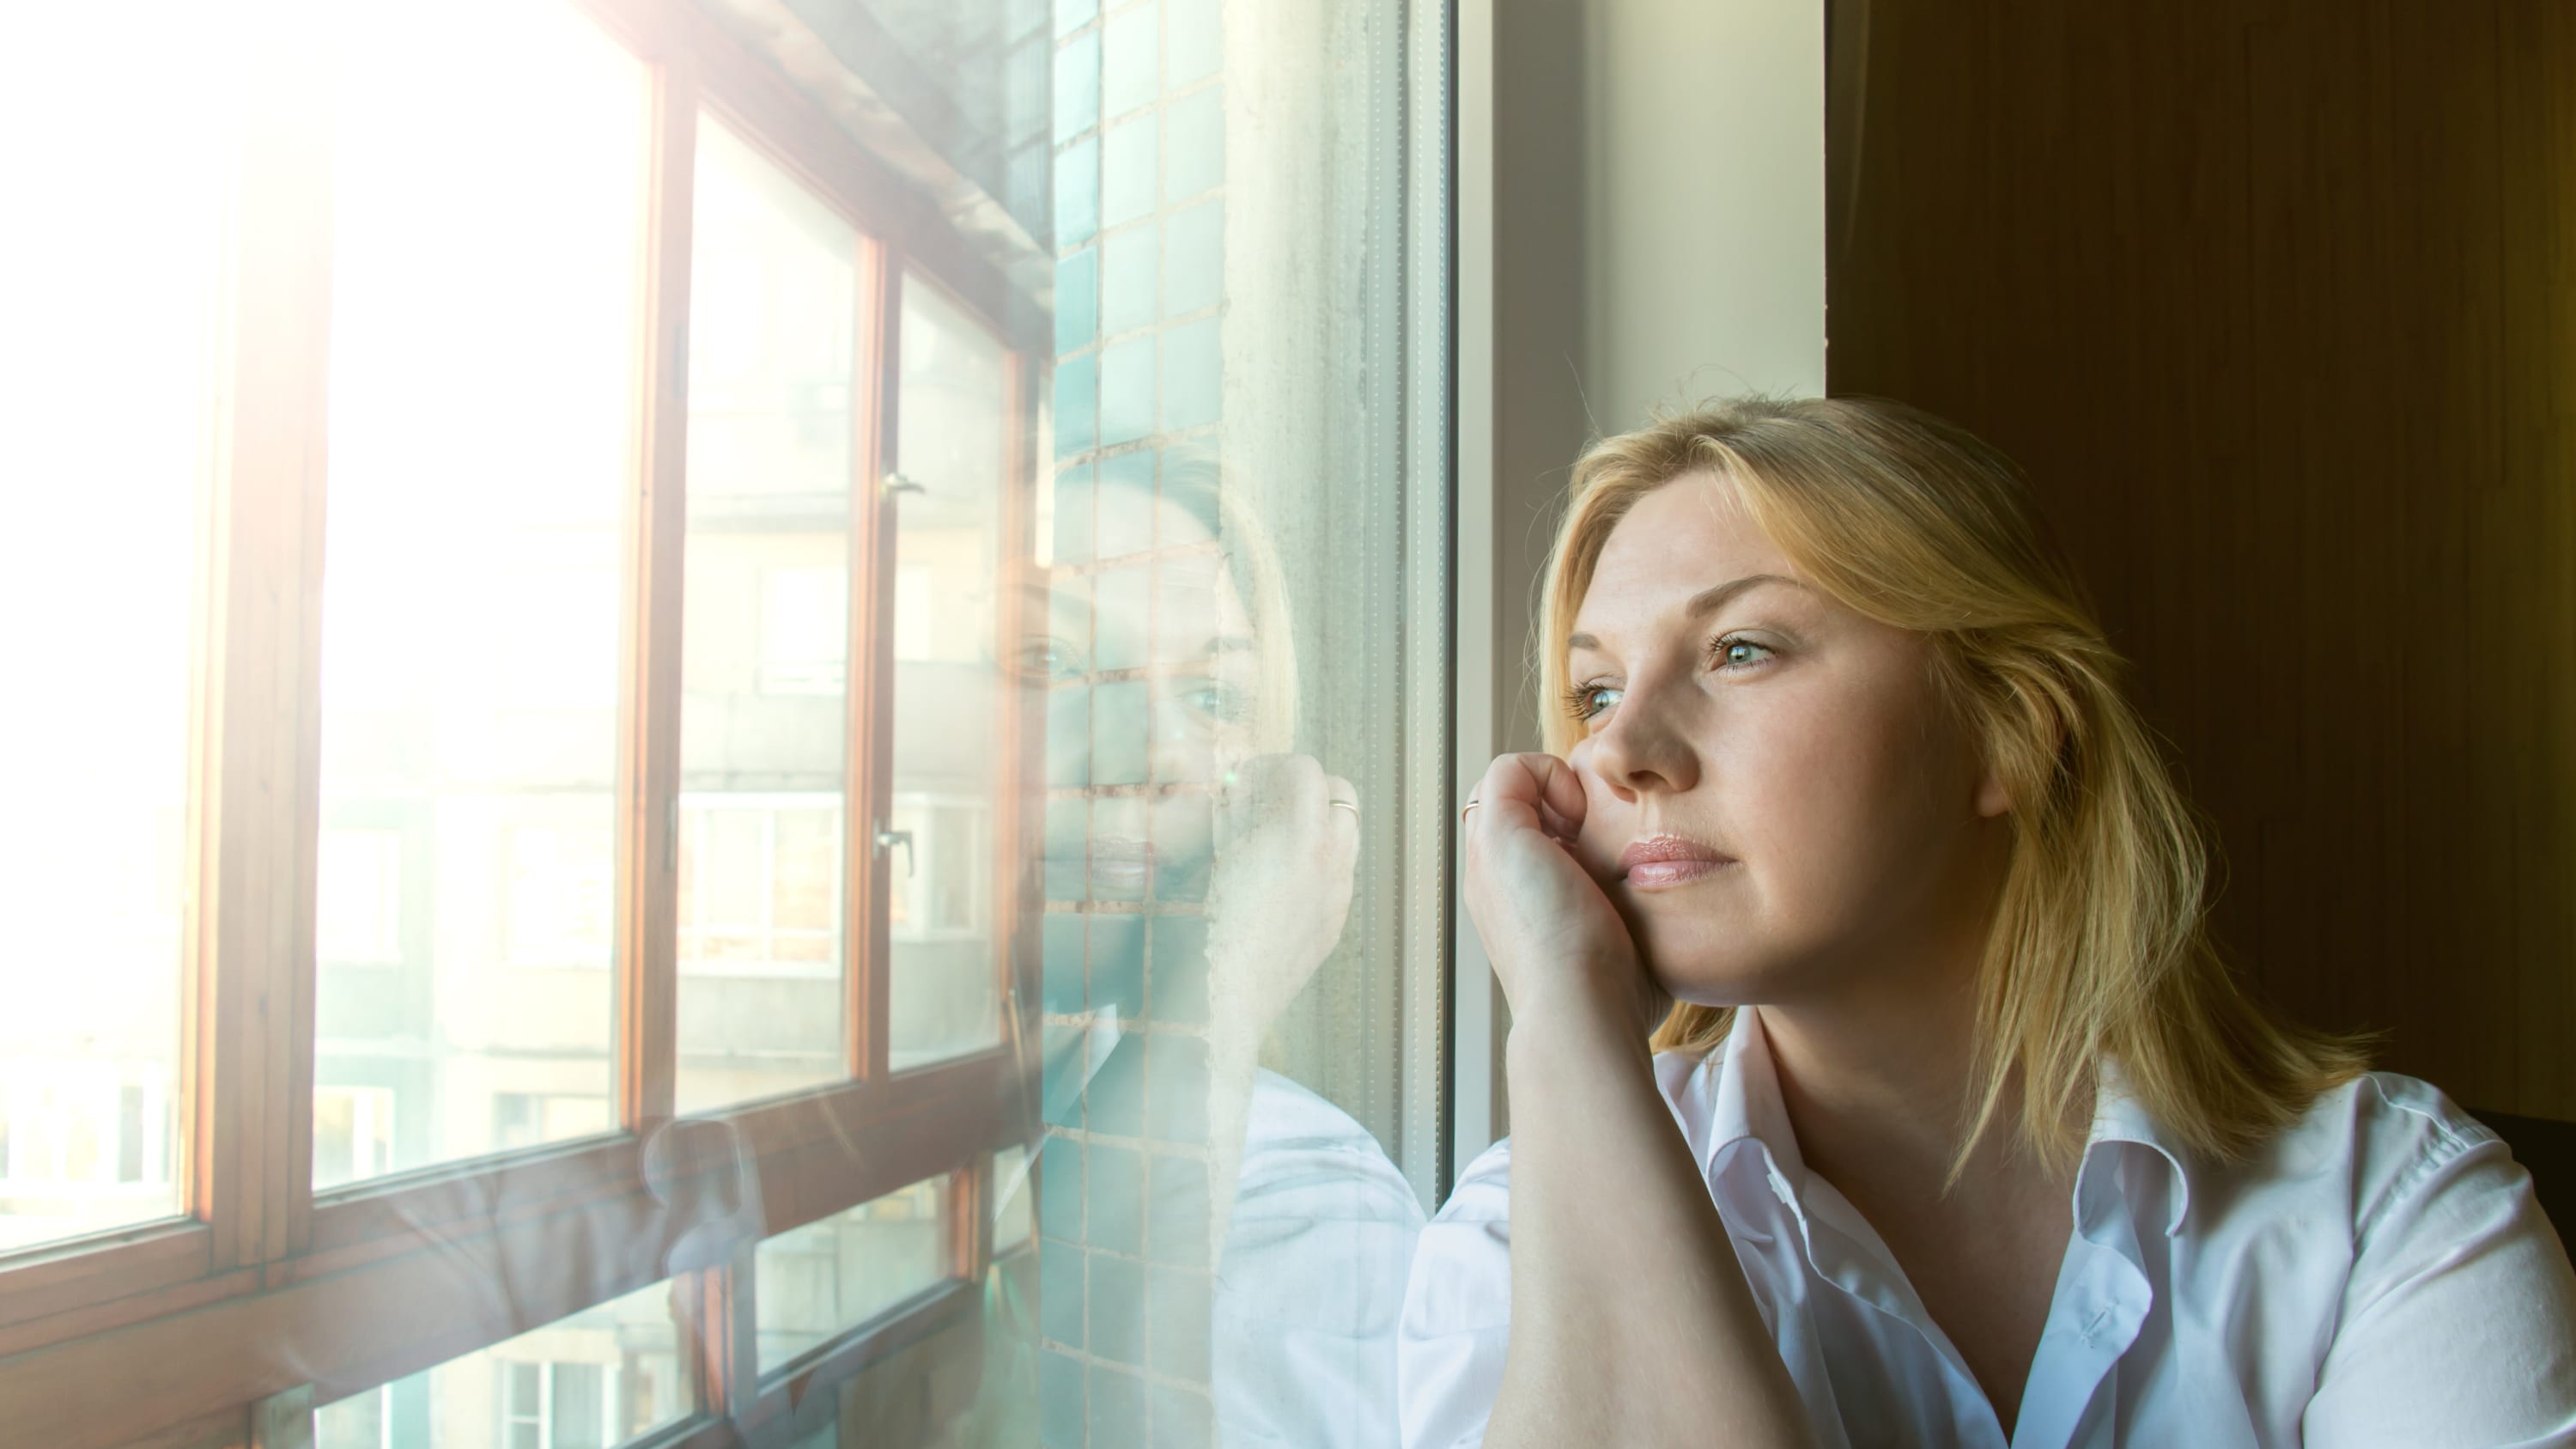 A woman possibly thinking about a colorectal cancer diagnosis